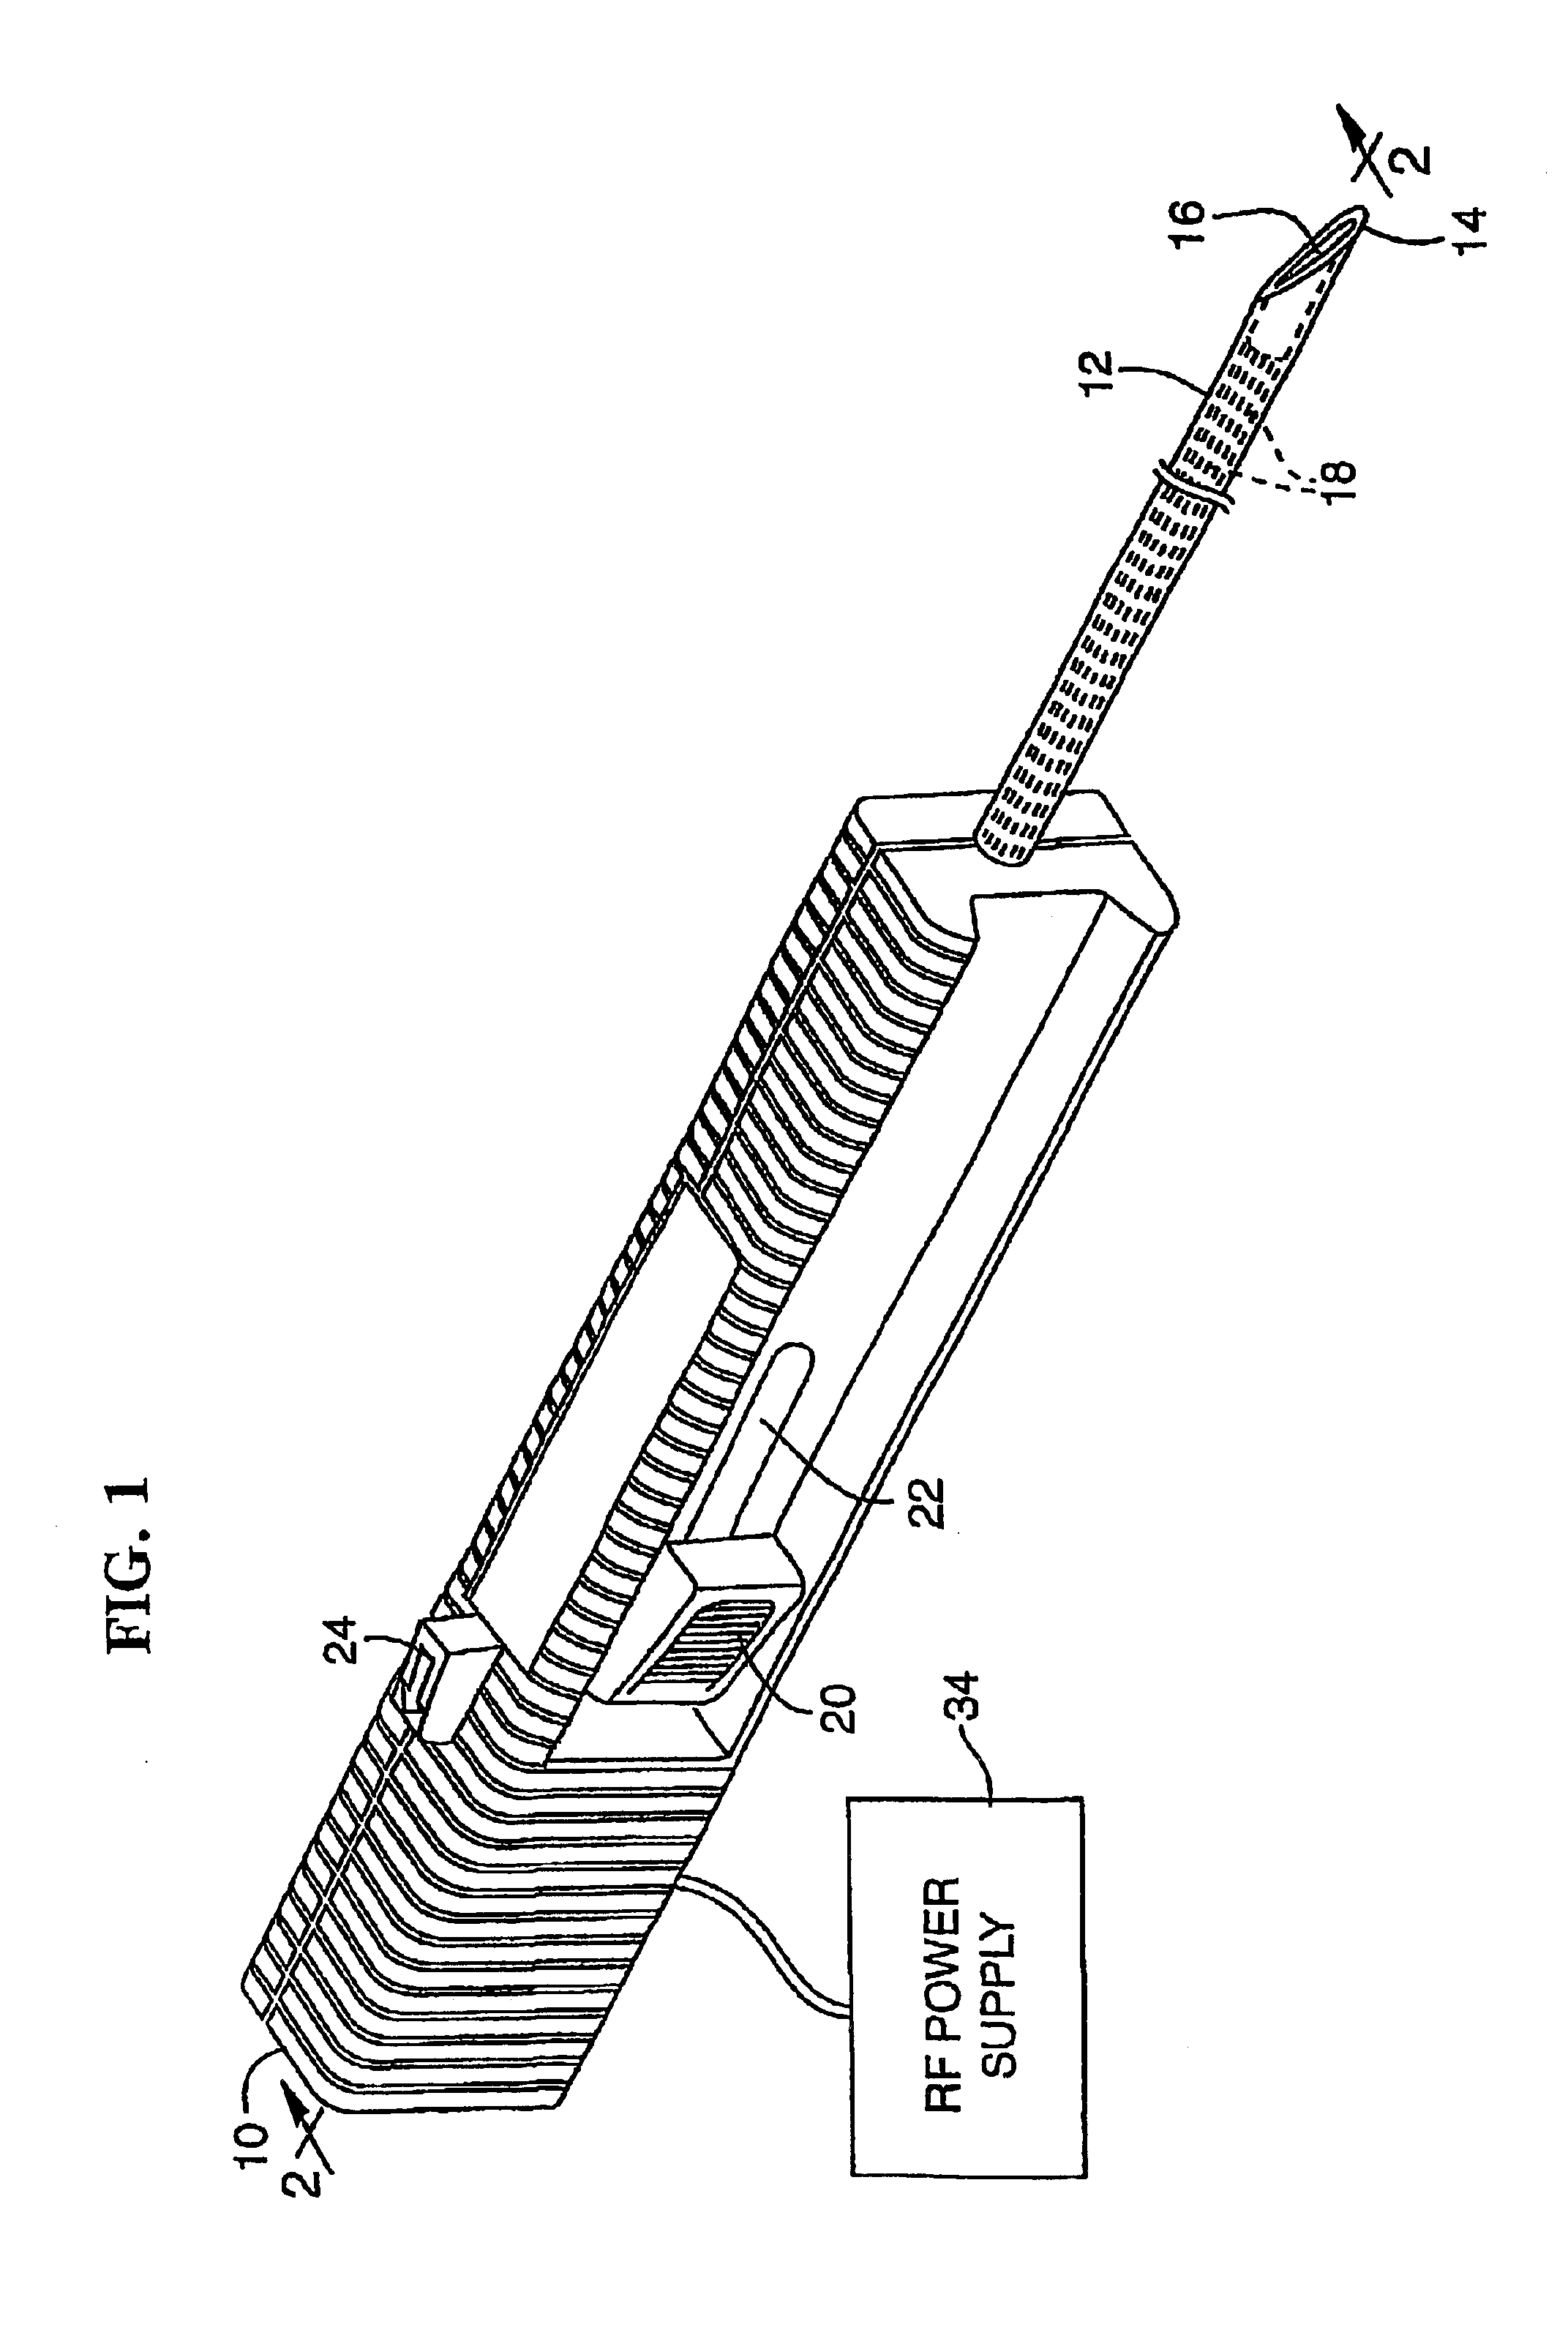 Radiofrequency probes for tissue treatment and methods of use